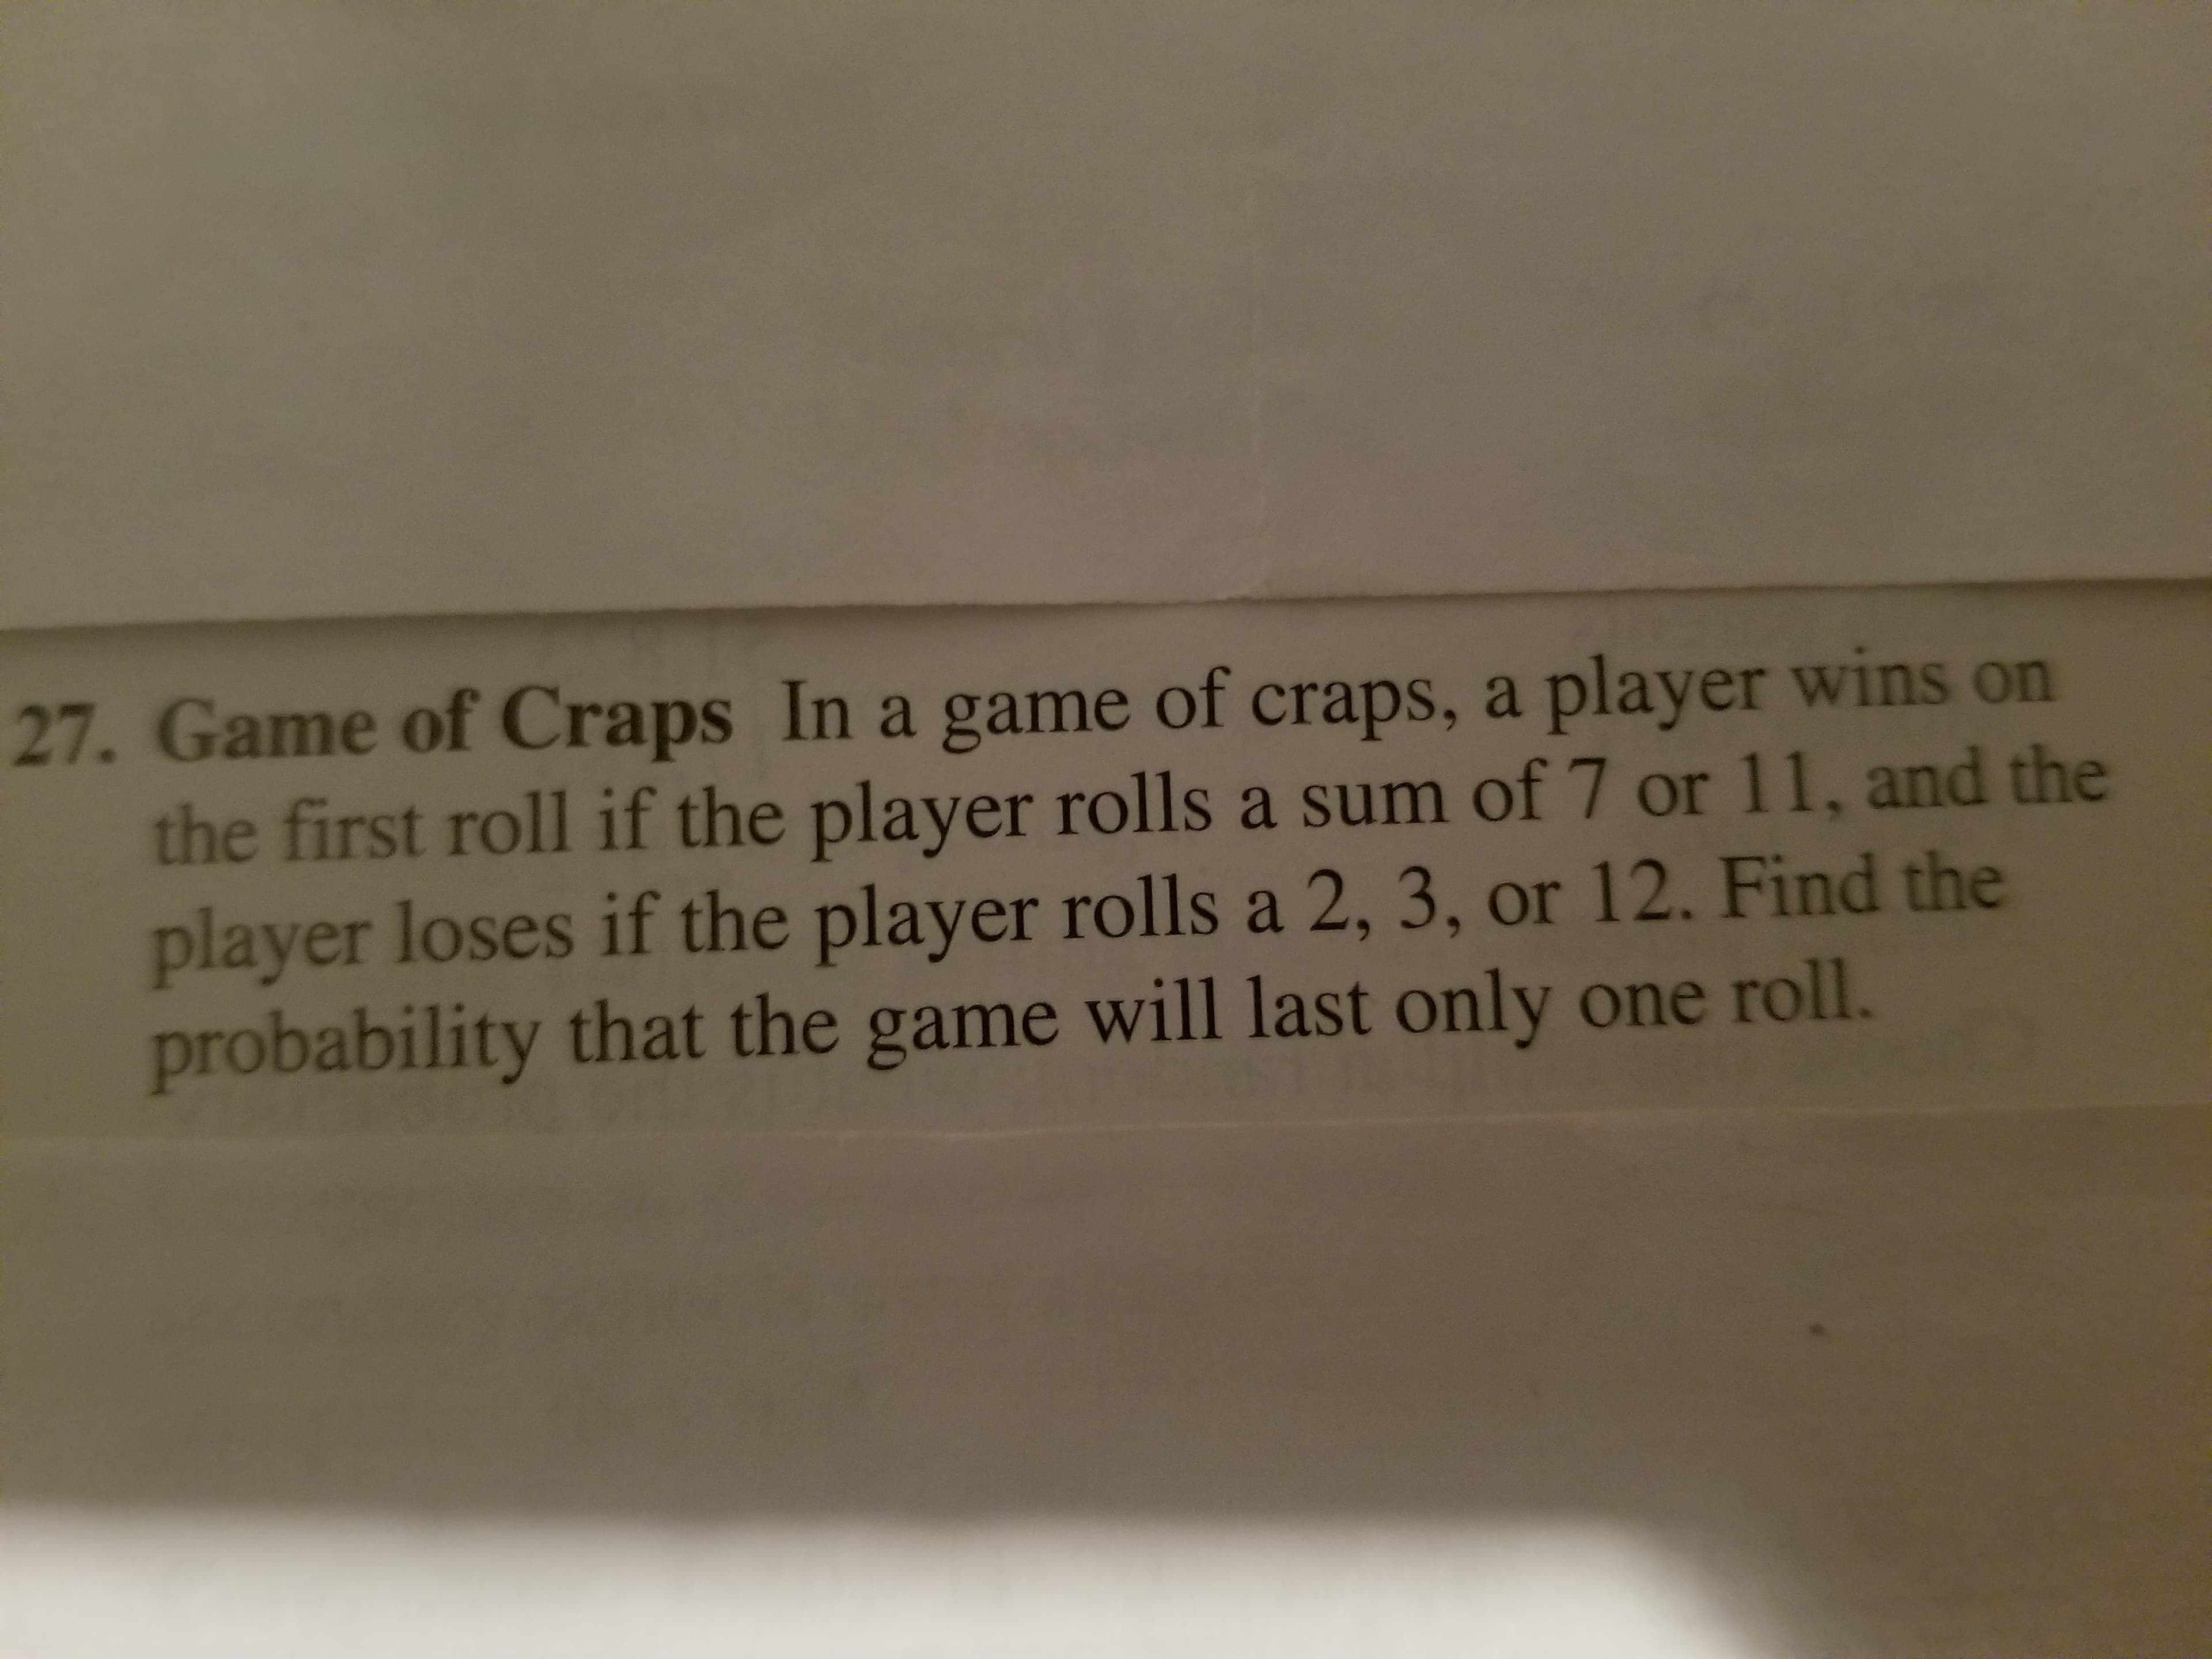 27. Game of Craps In a game of craps, a player wins on
the first roll if the player rolls a sum of 7 or 11, and the
player loses if the player rolls a 2, 3, or 12. Find the
probability that the game will last only one roll.
